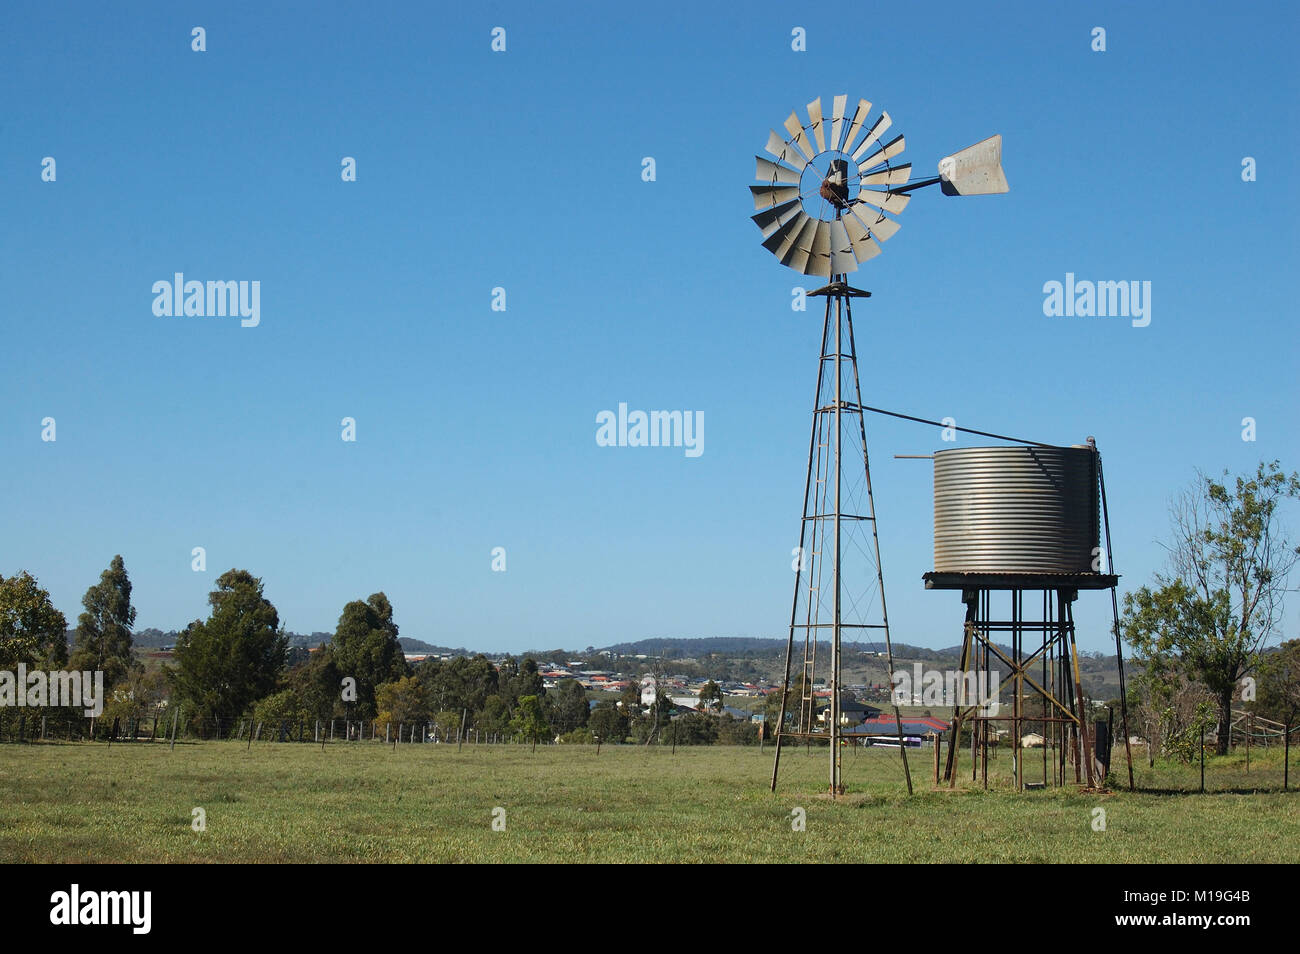 Windmill and tankstand in paddock, Queensland, Australia. Windmills are commonly used for pumping water from bores or dams to troughs for livestock. Stock Photo